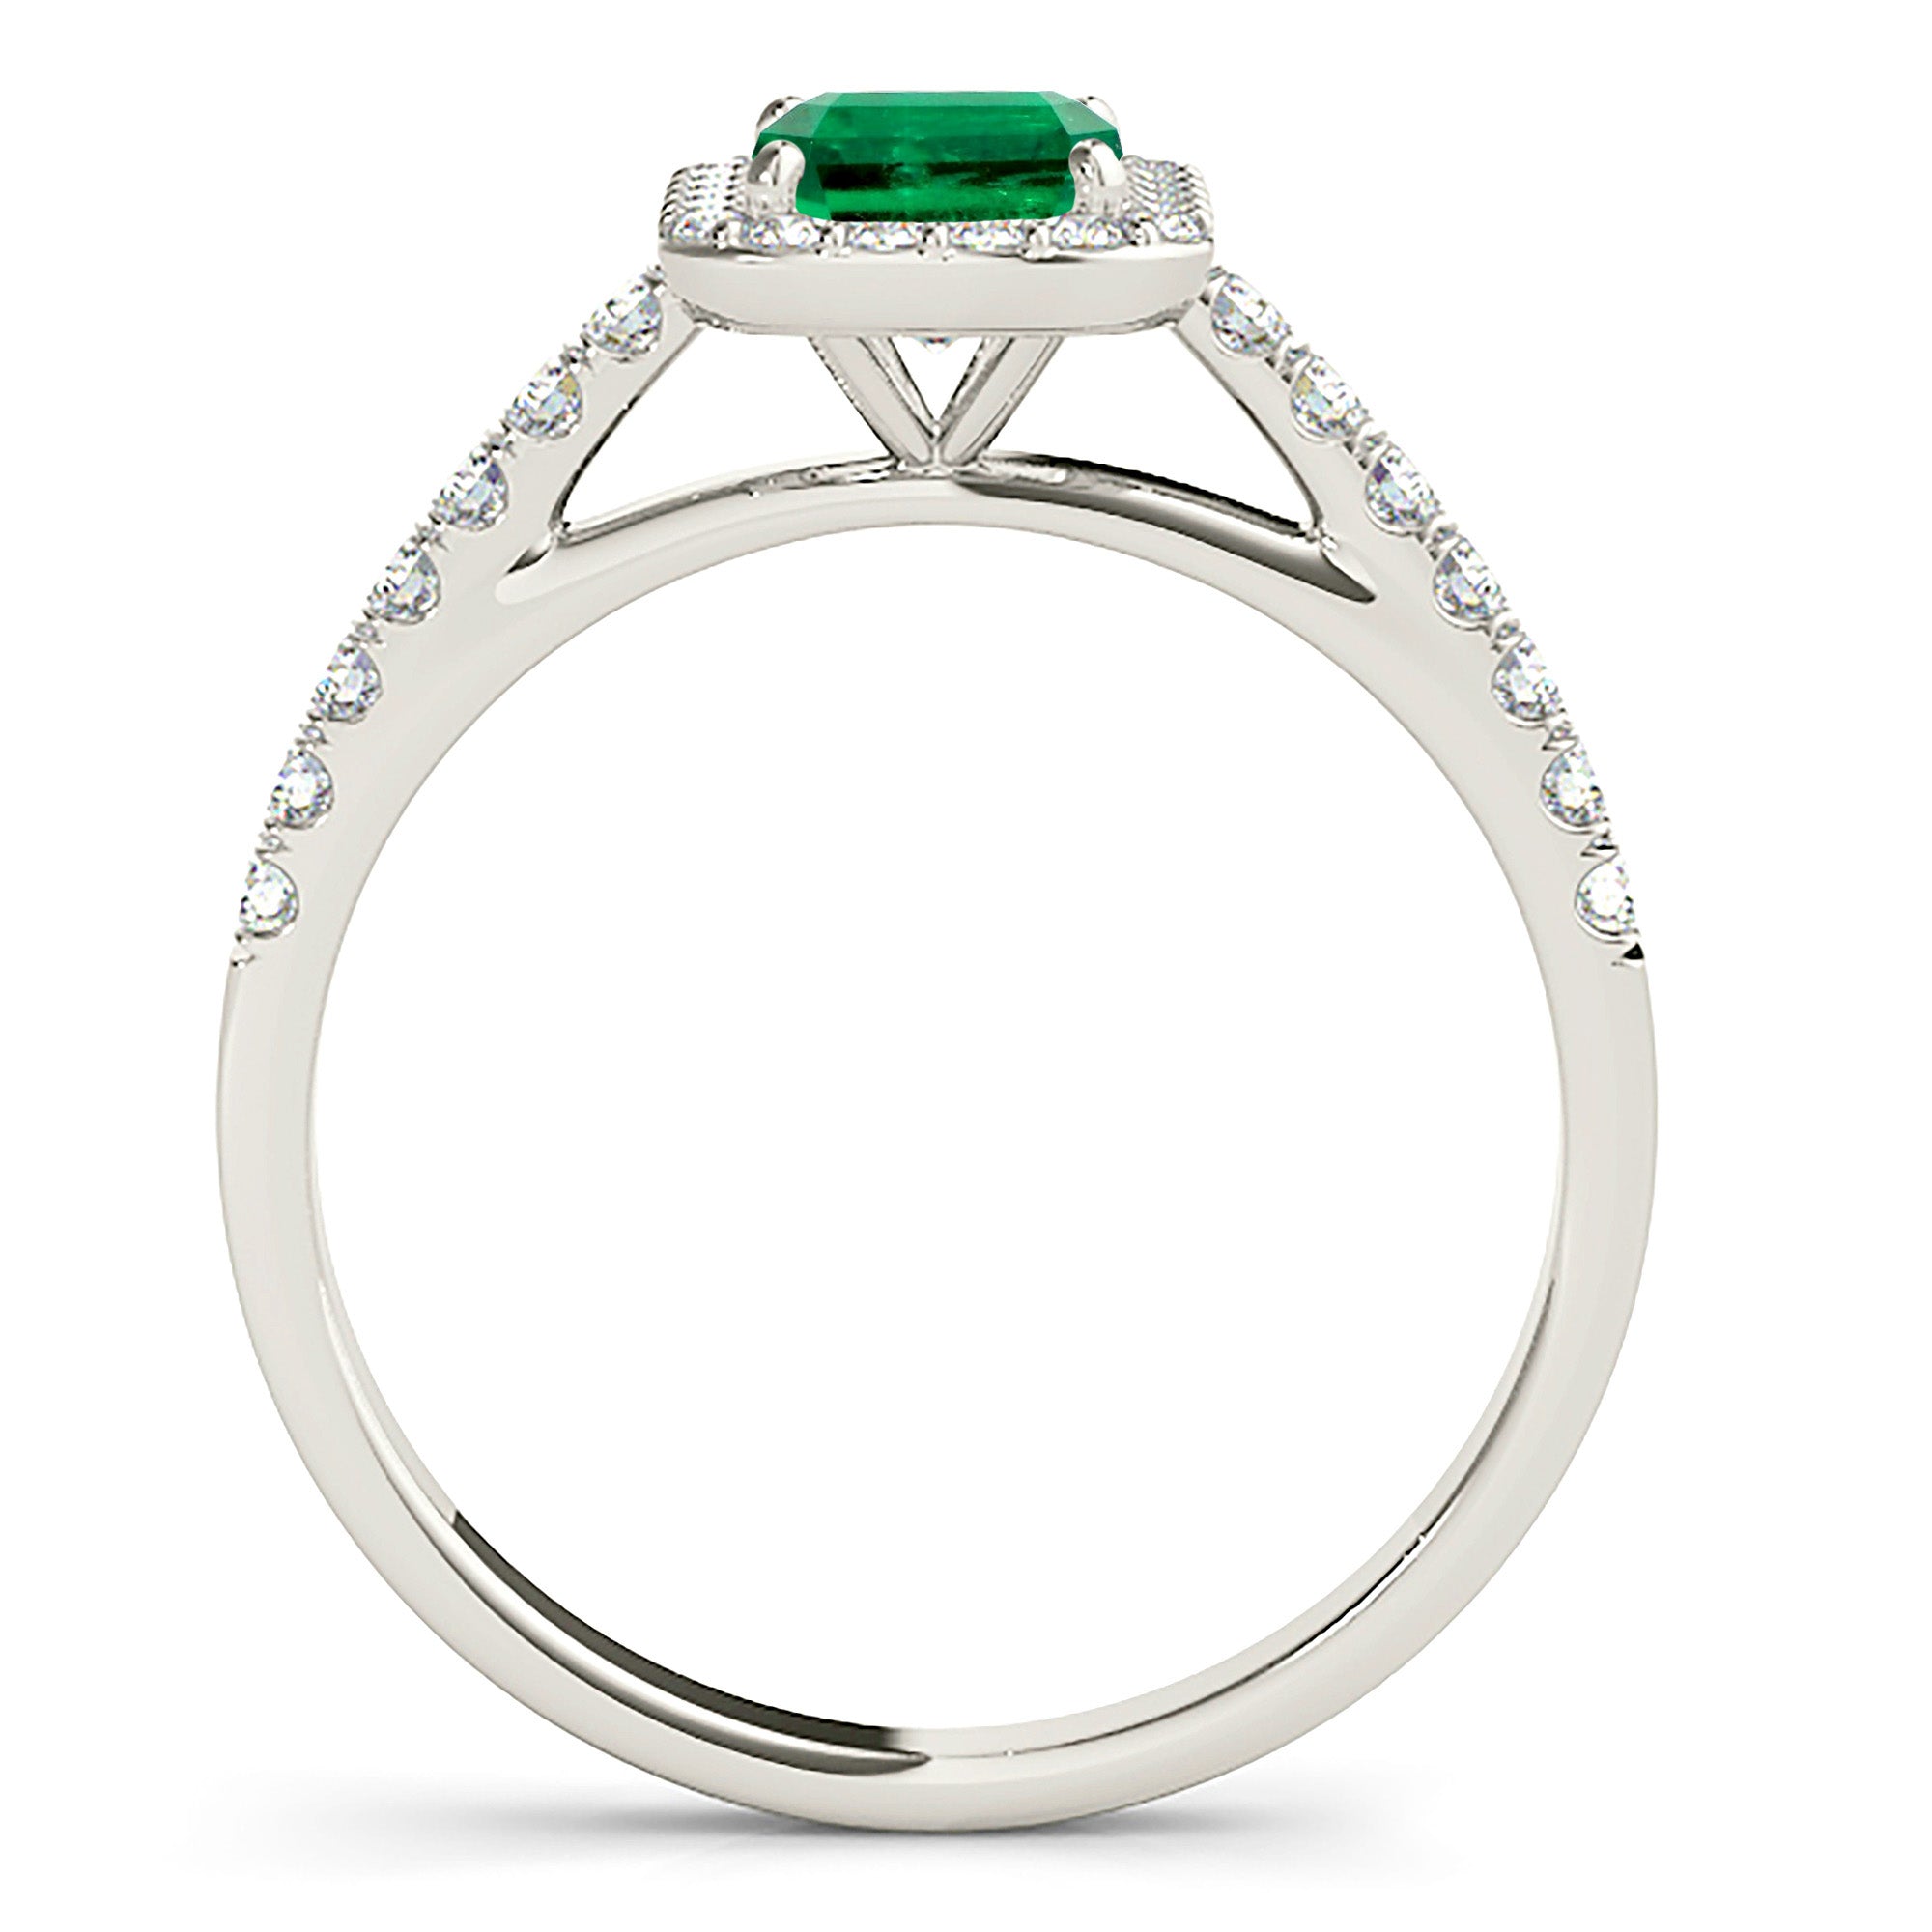 1.00 ct. Genuine Emerald Ring With 0.25 ctw. Diamond Halo and Diamond Delicate Shank-in 14K/18K White, Yellow, Rose Gold and Platinum - Christmas Jewelry Gift -VIRABYANI